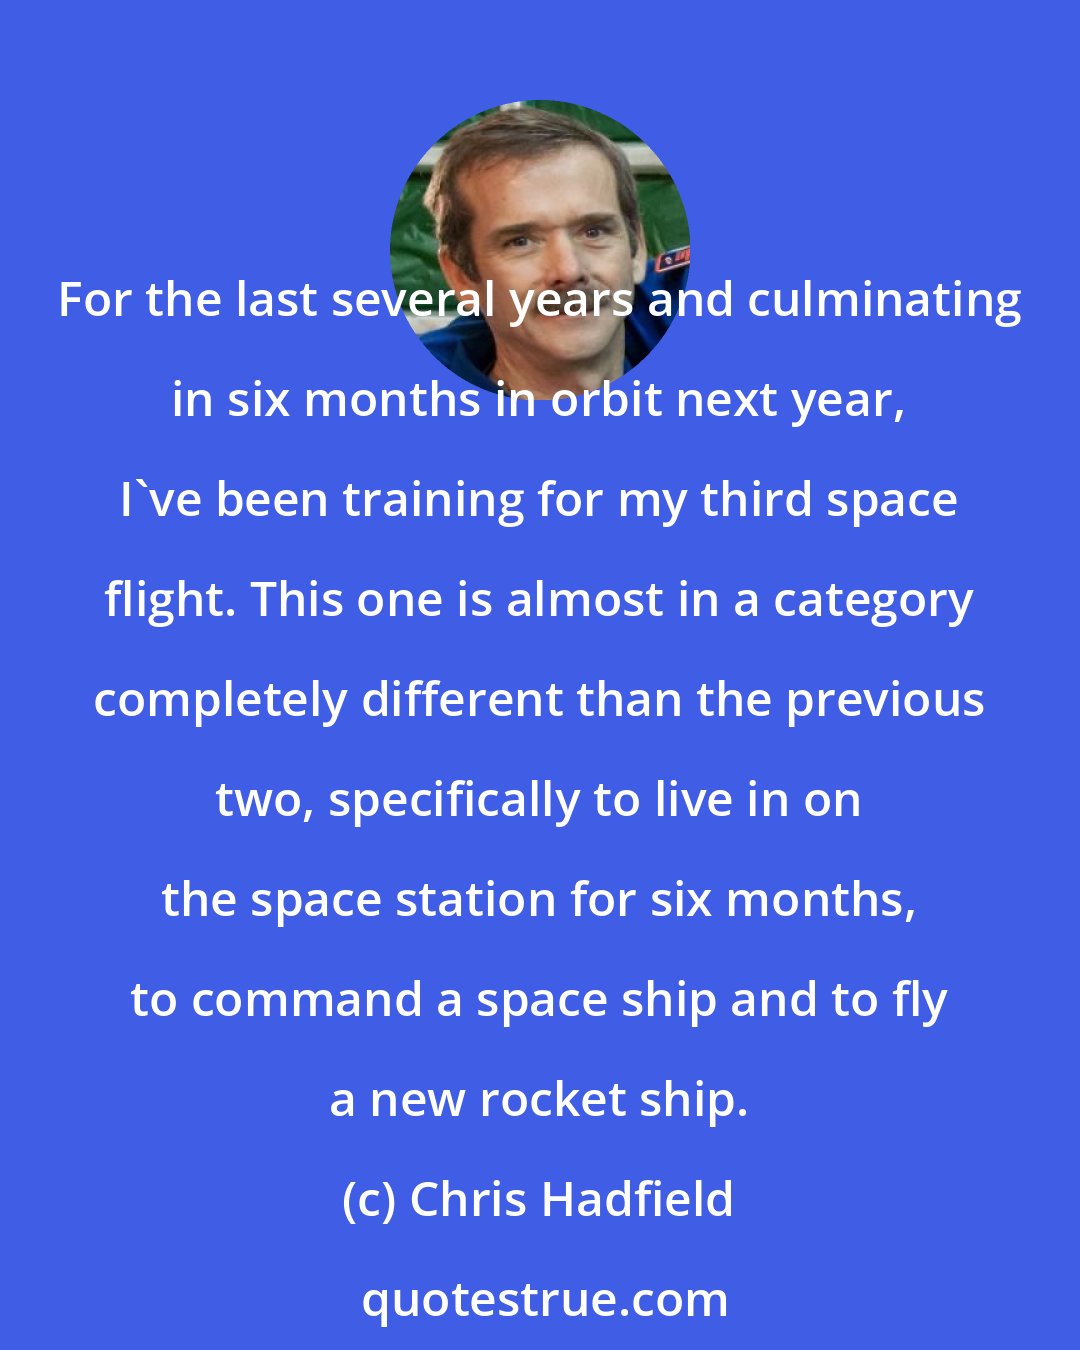 Chris Hadfield: For the last several years and culminating in six months in orbit next year, I've been training for my third space flight. This one is almost in a category completely different than the previous two, specifically to live in on the space station for six months, to command a space ship and to fly a new rocket ship.